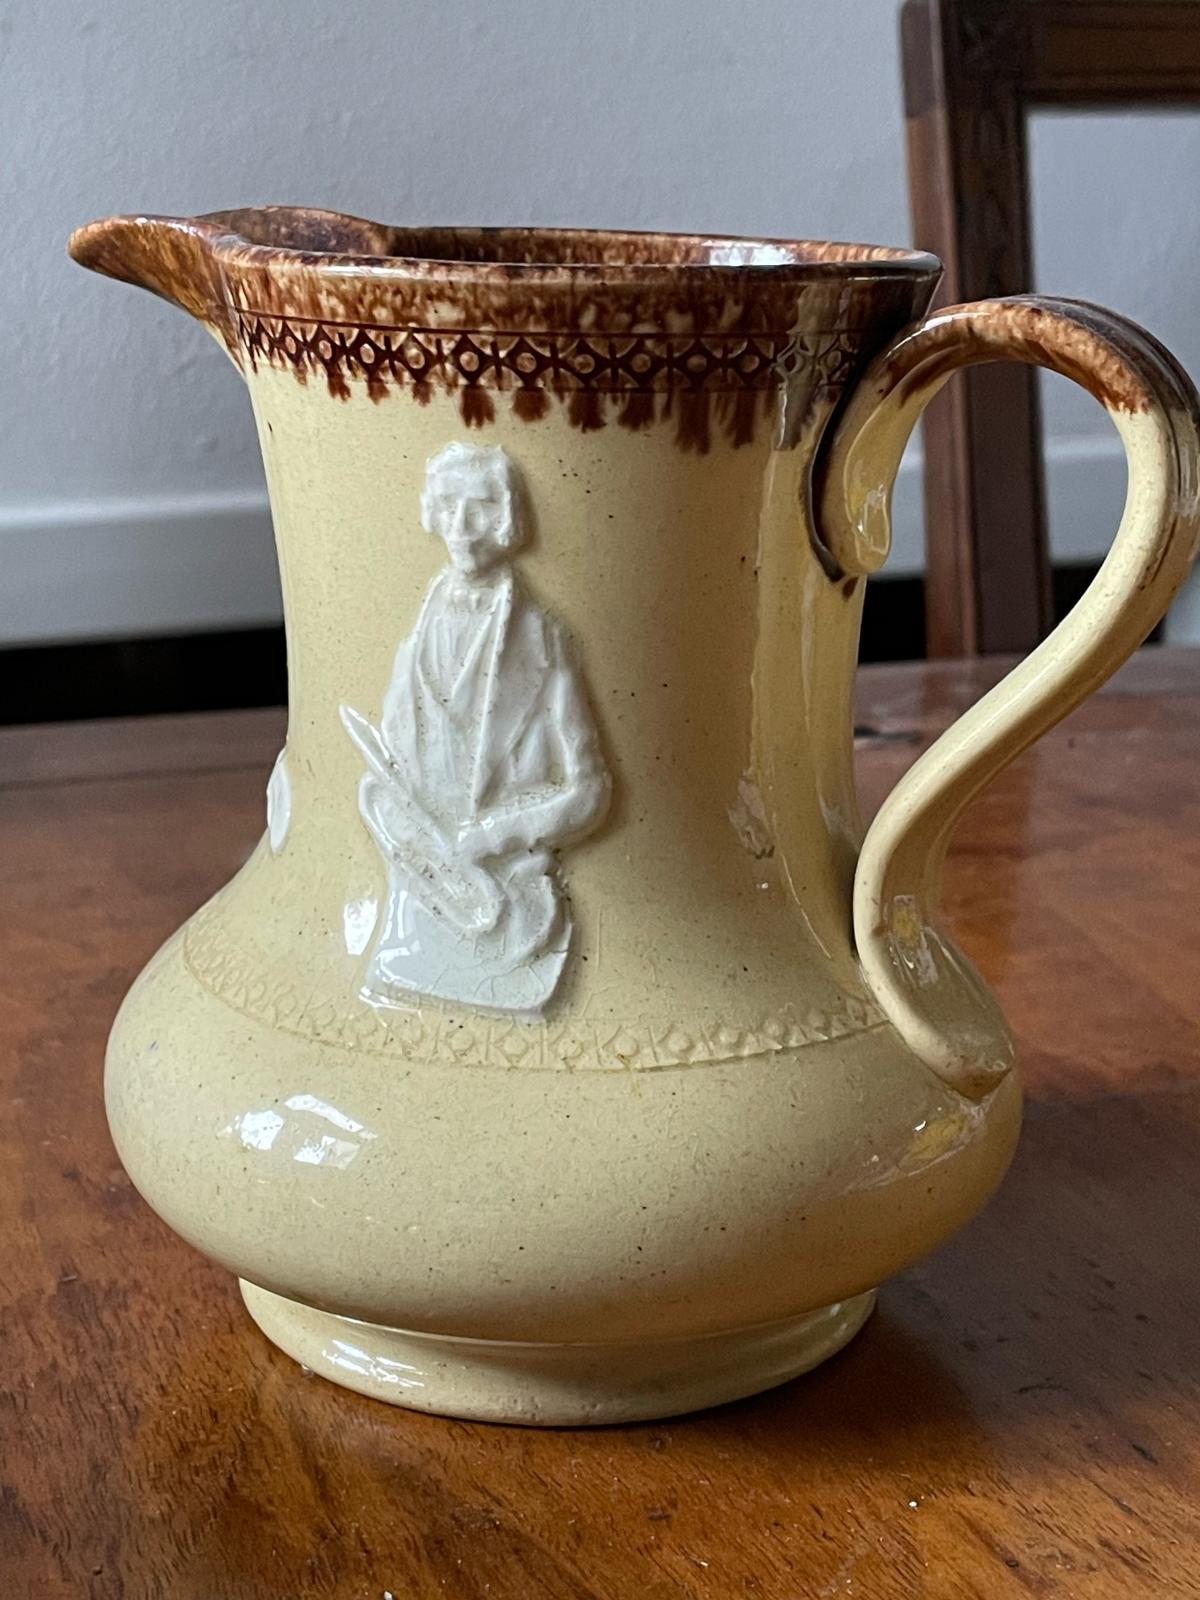 Original Distins "merch": 19th century jug depicting members of the Distin family and their instruments